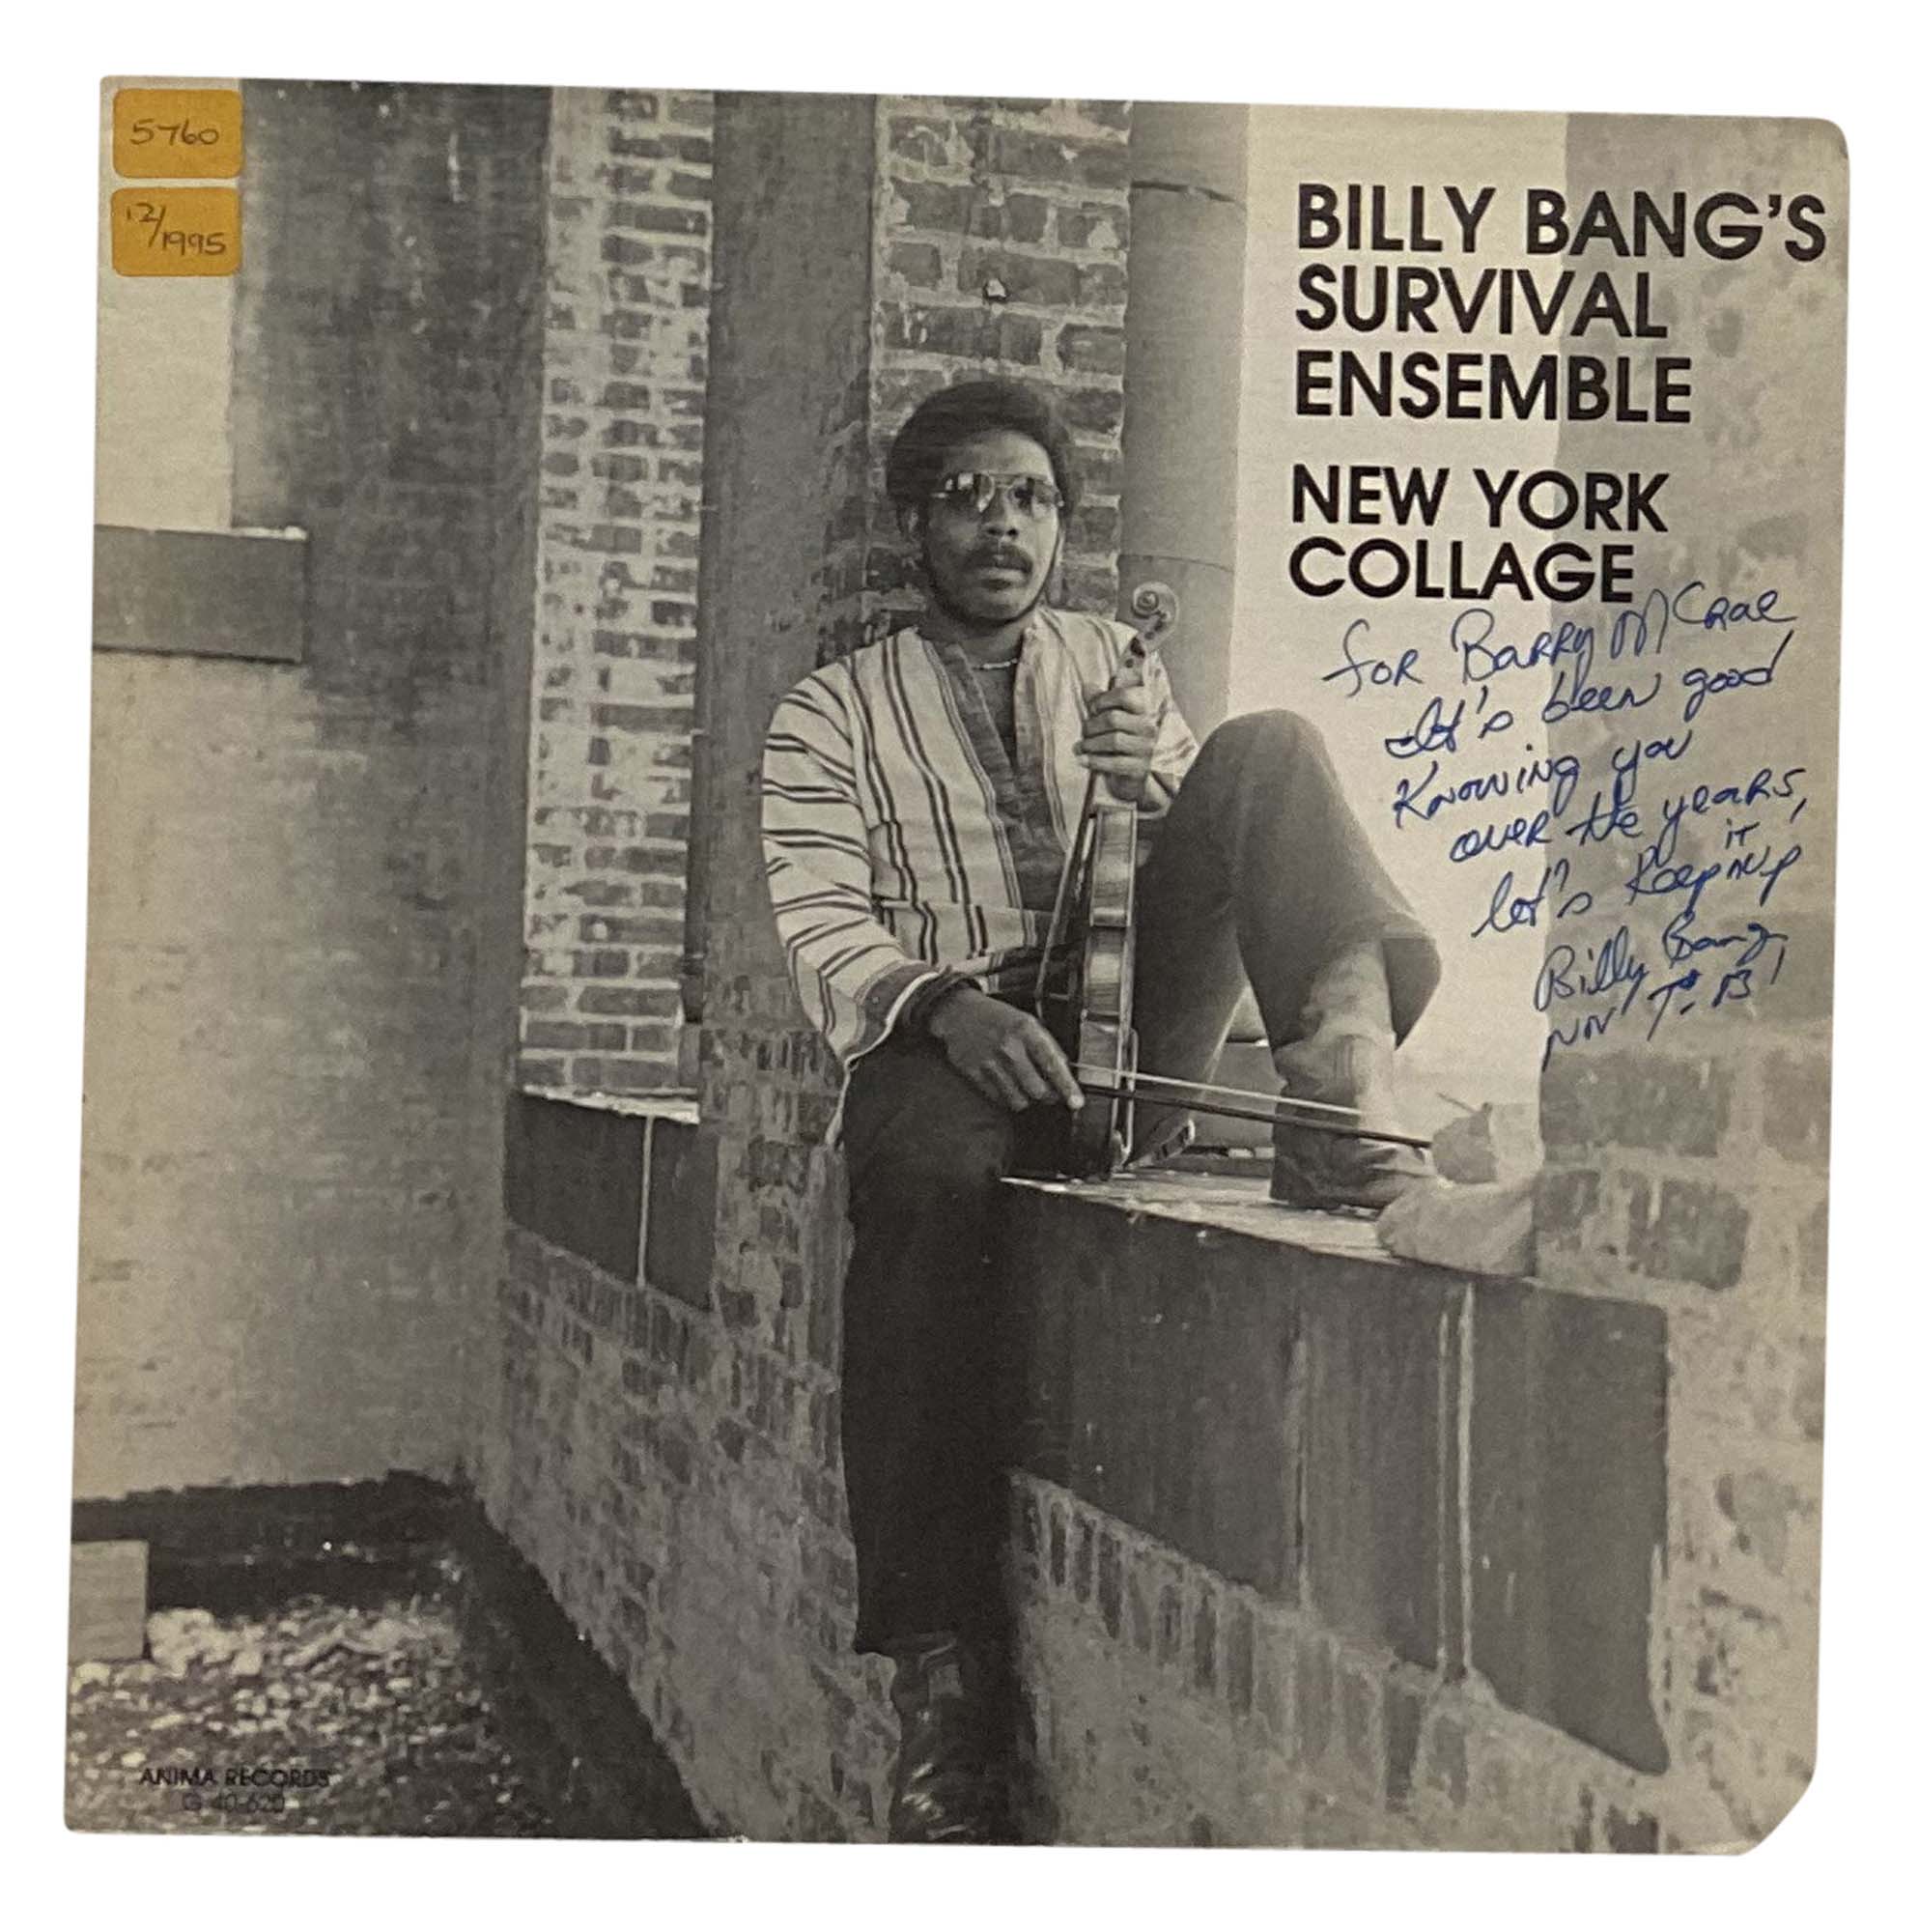 BILLY BANG'S SURVIVAL ENSEMBLE - NEW YORK COLLAGE LP - SIGNED COPY.